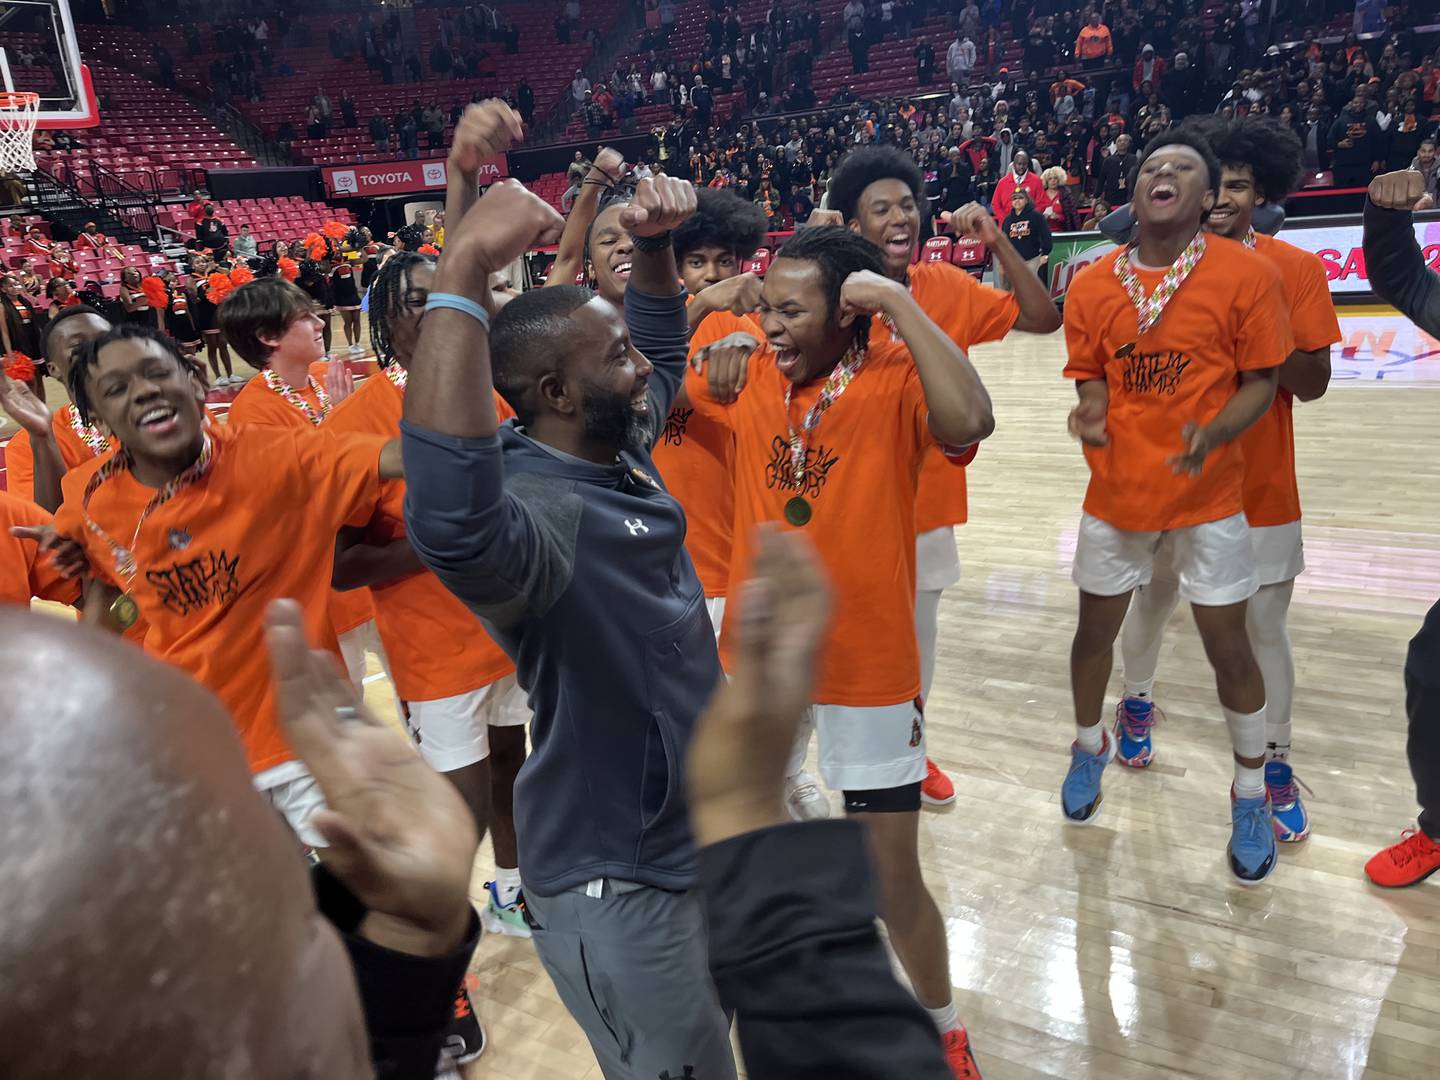 City boys basketball Omarr Smith does a flex pose before receiving the Class 3A state championship trophy Thursday evening. The No. 3 Knights won their first title since 2014 with a 67-54 victory over Damascus at the University of Maryland.